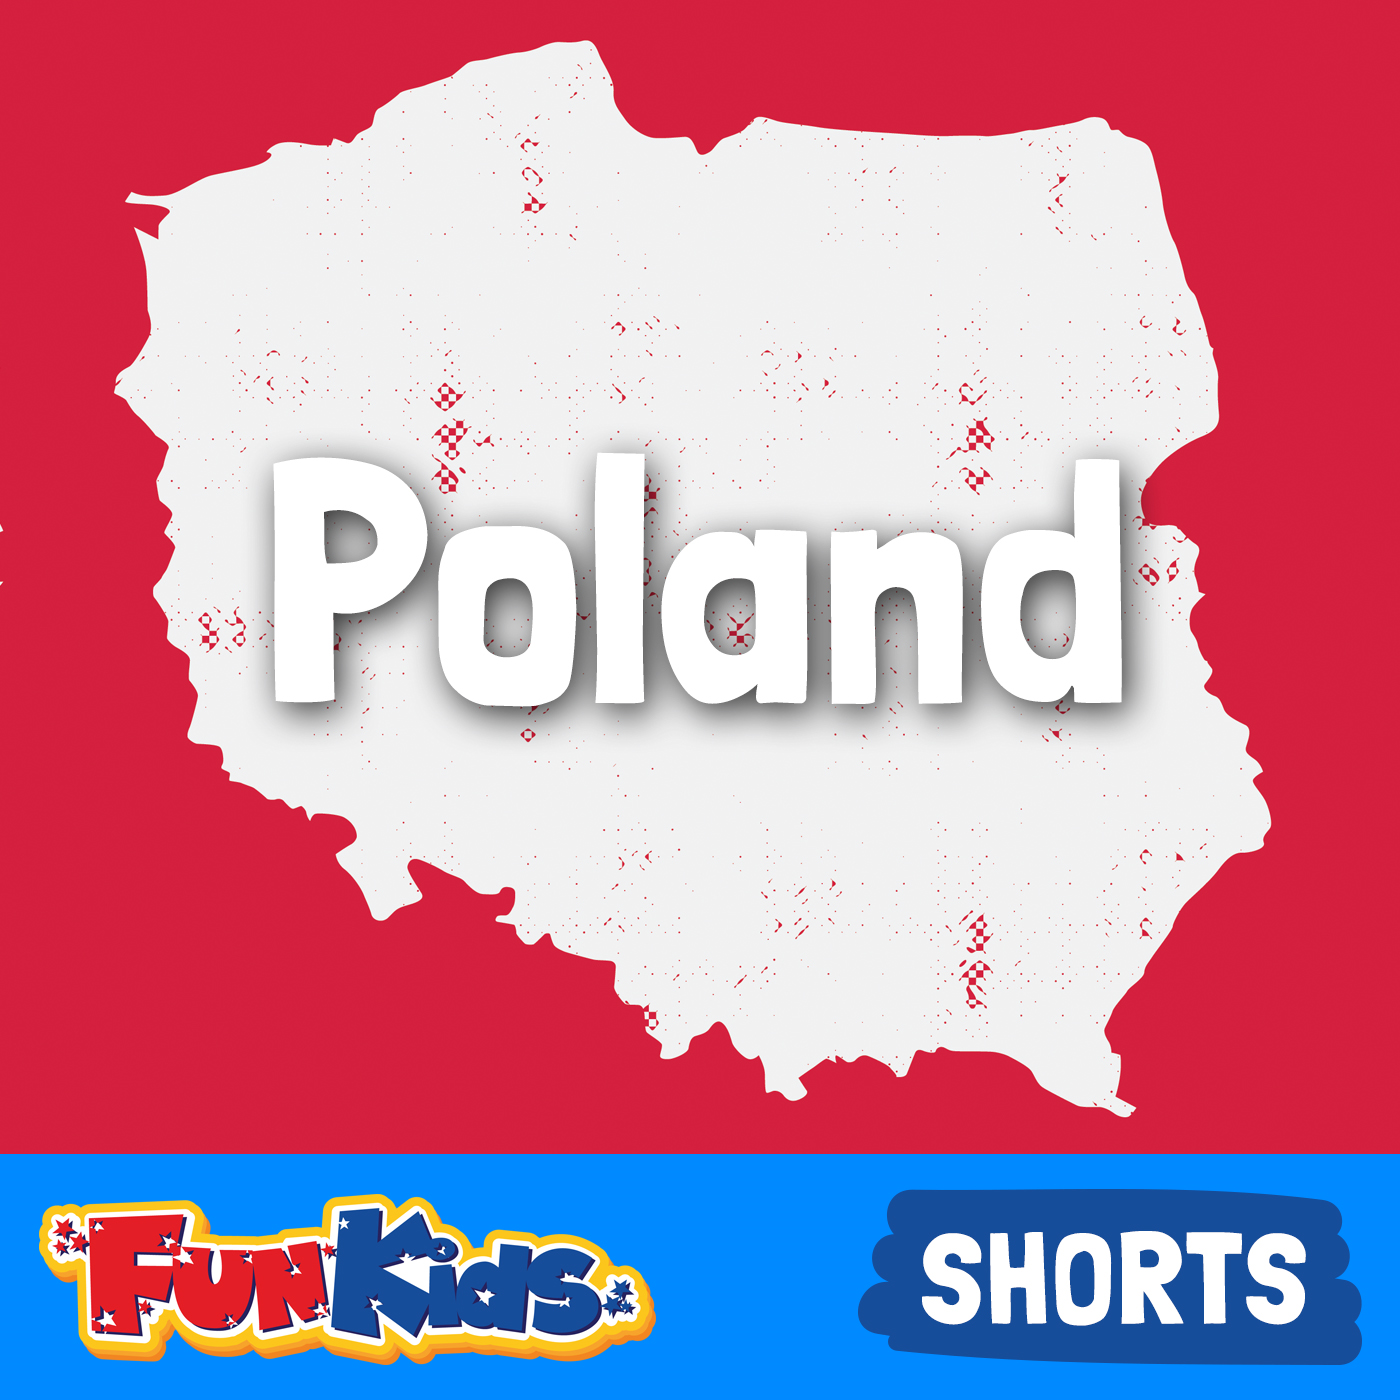 Famous People from Poland